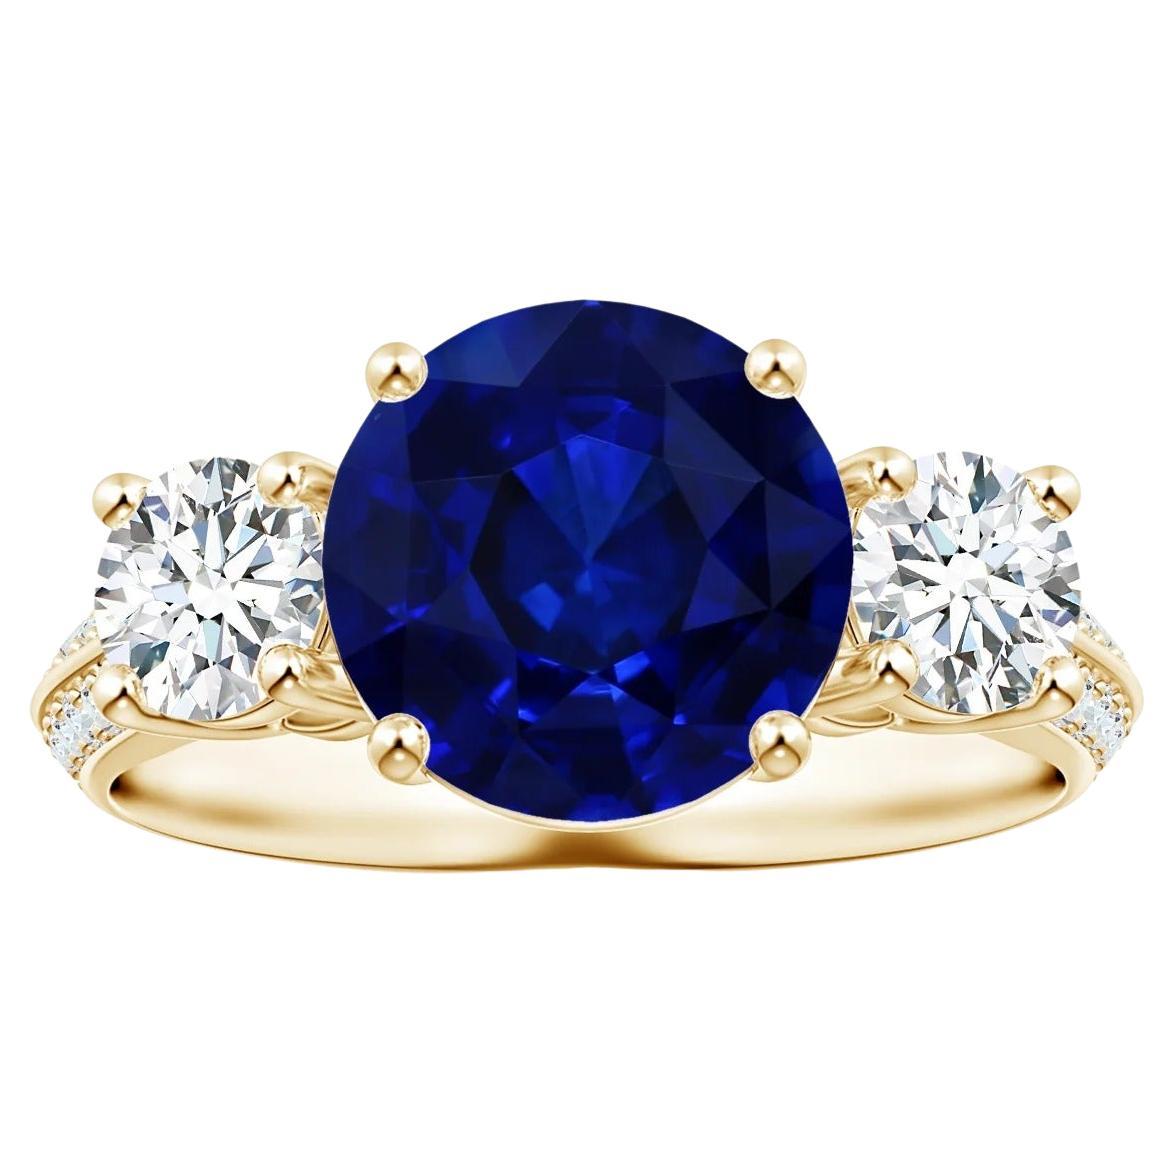 ANGARA GIA Certified Natural Blue Sapphire Ring in Yellow Gold with Diamonds